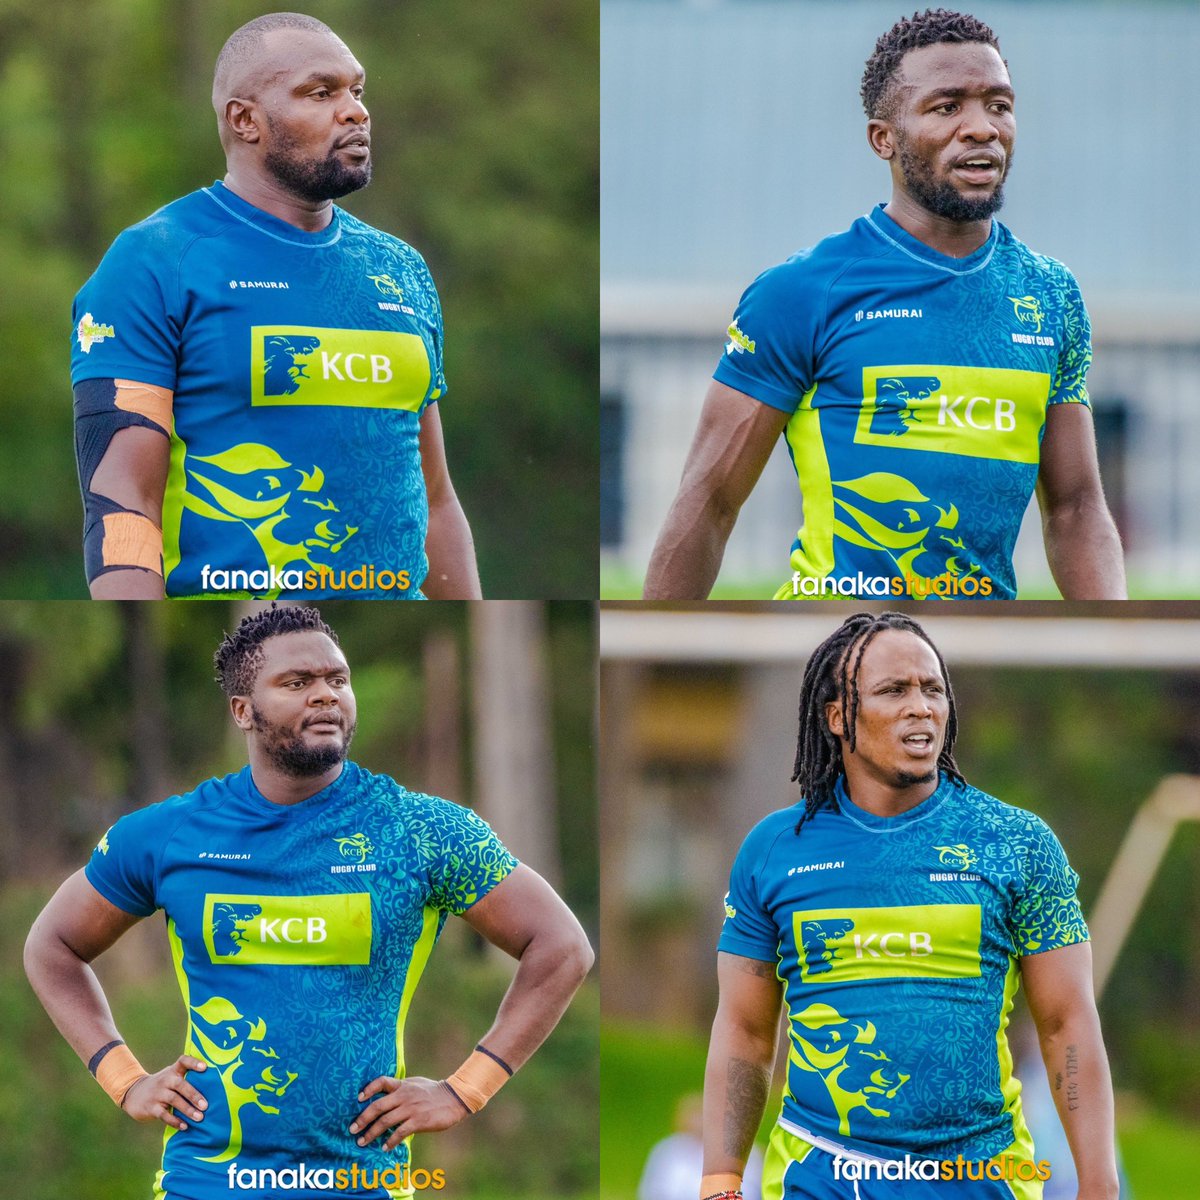 #tuesdayfeels The look on your face when you give Monday your all only to remember that Tuesday is Monday Jnr. Wueh!!! 🤣 Have a terrific Tuesday pride. #RugbyKe #Believe #Commitment #LionHeartedRugby